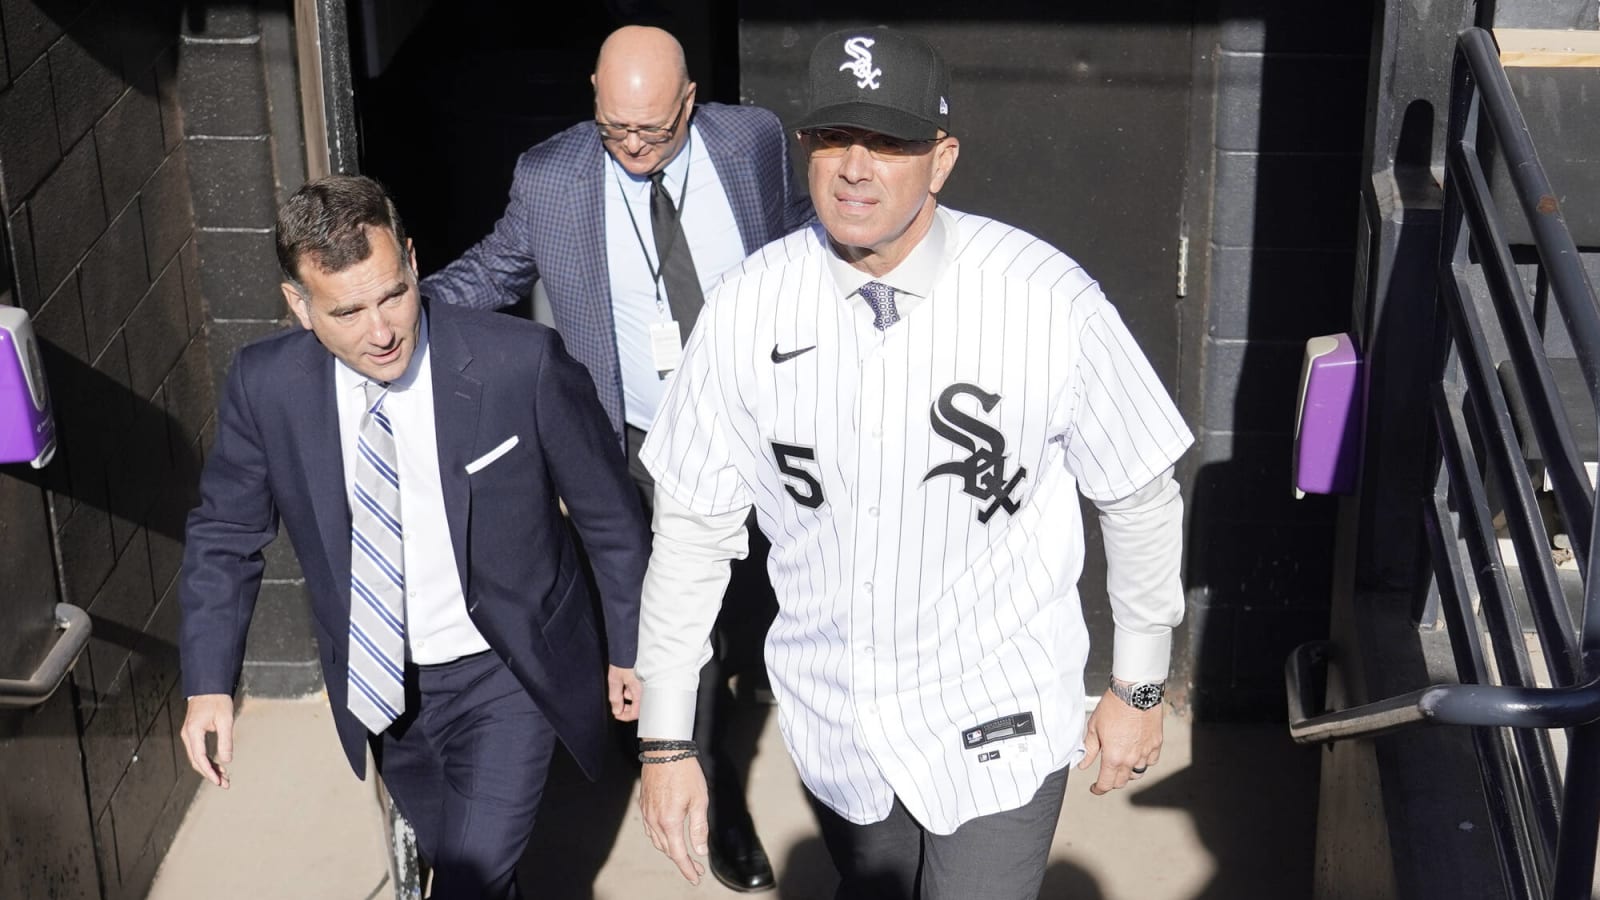 New White Sox Manager Declares His Initial Goals